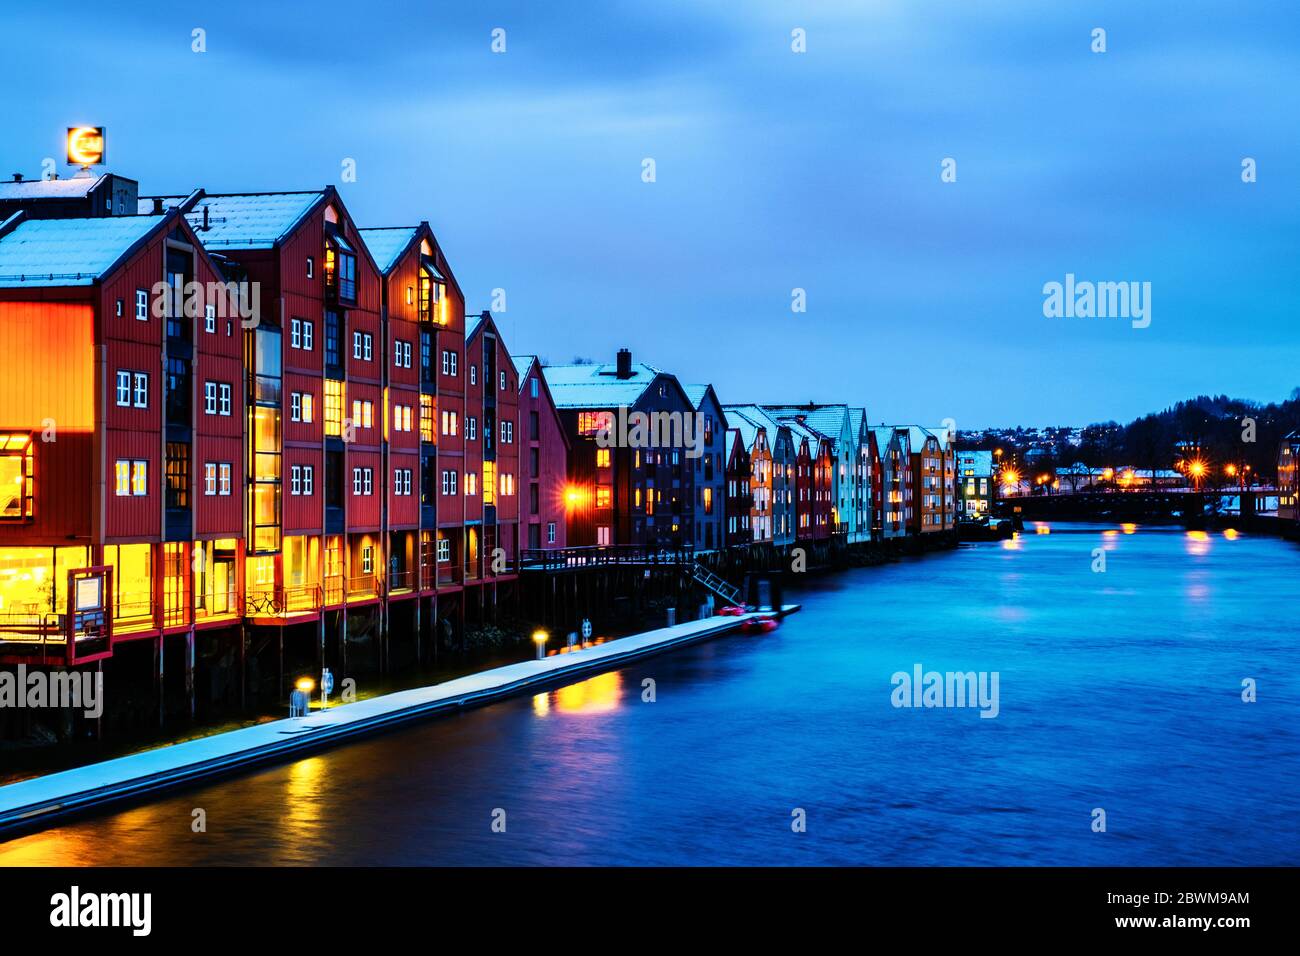 Trondheim, Norway. City center of Trondheim, Norway during the cloudy winter night. Illuminated historical colorful building and grey cloudy sky Stock Photo